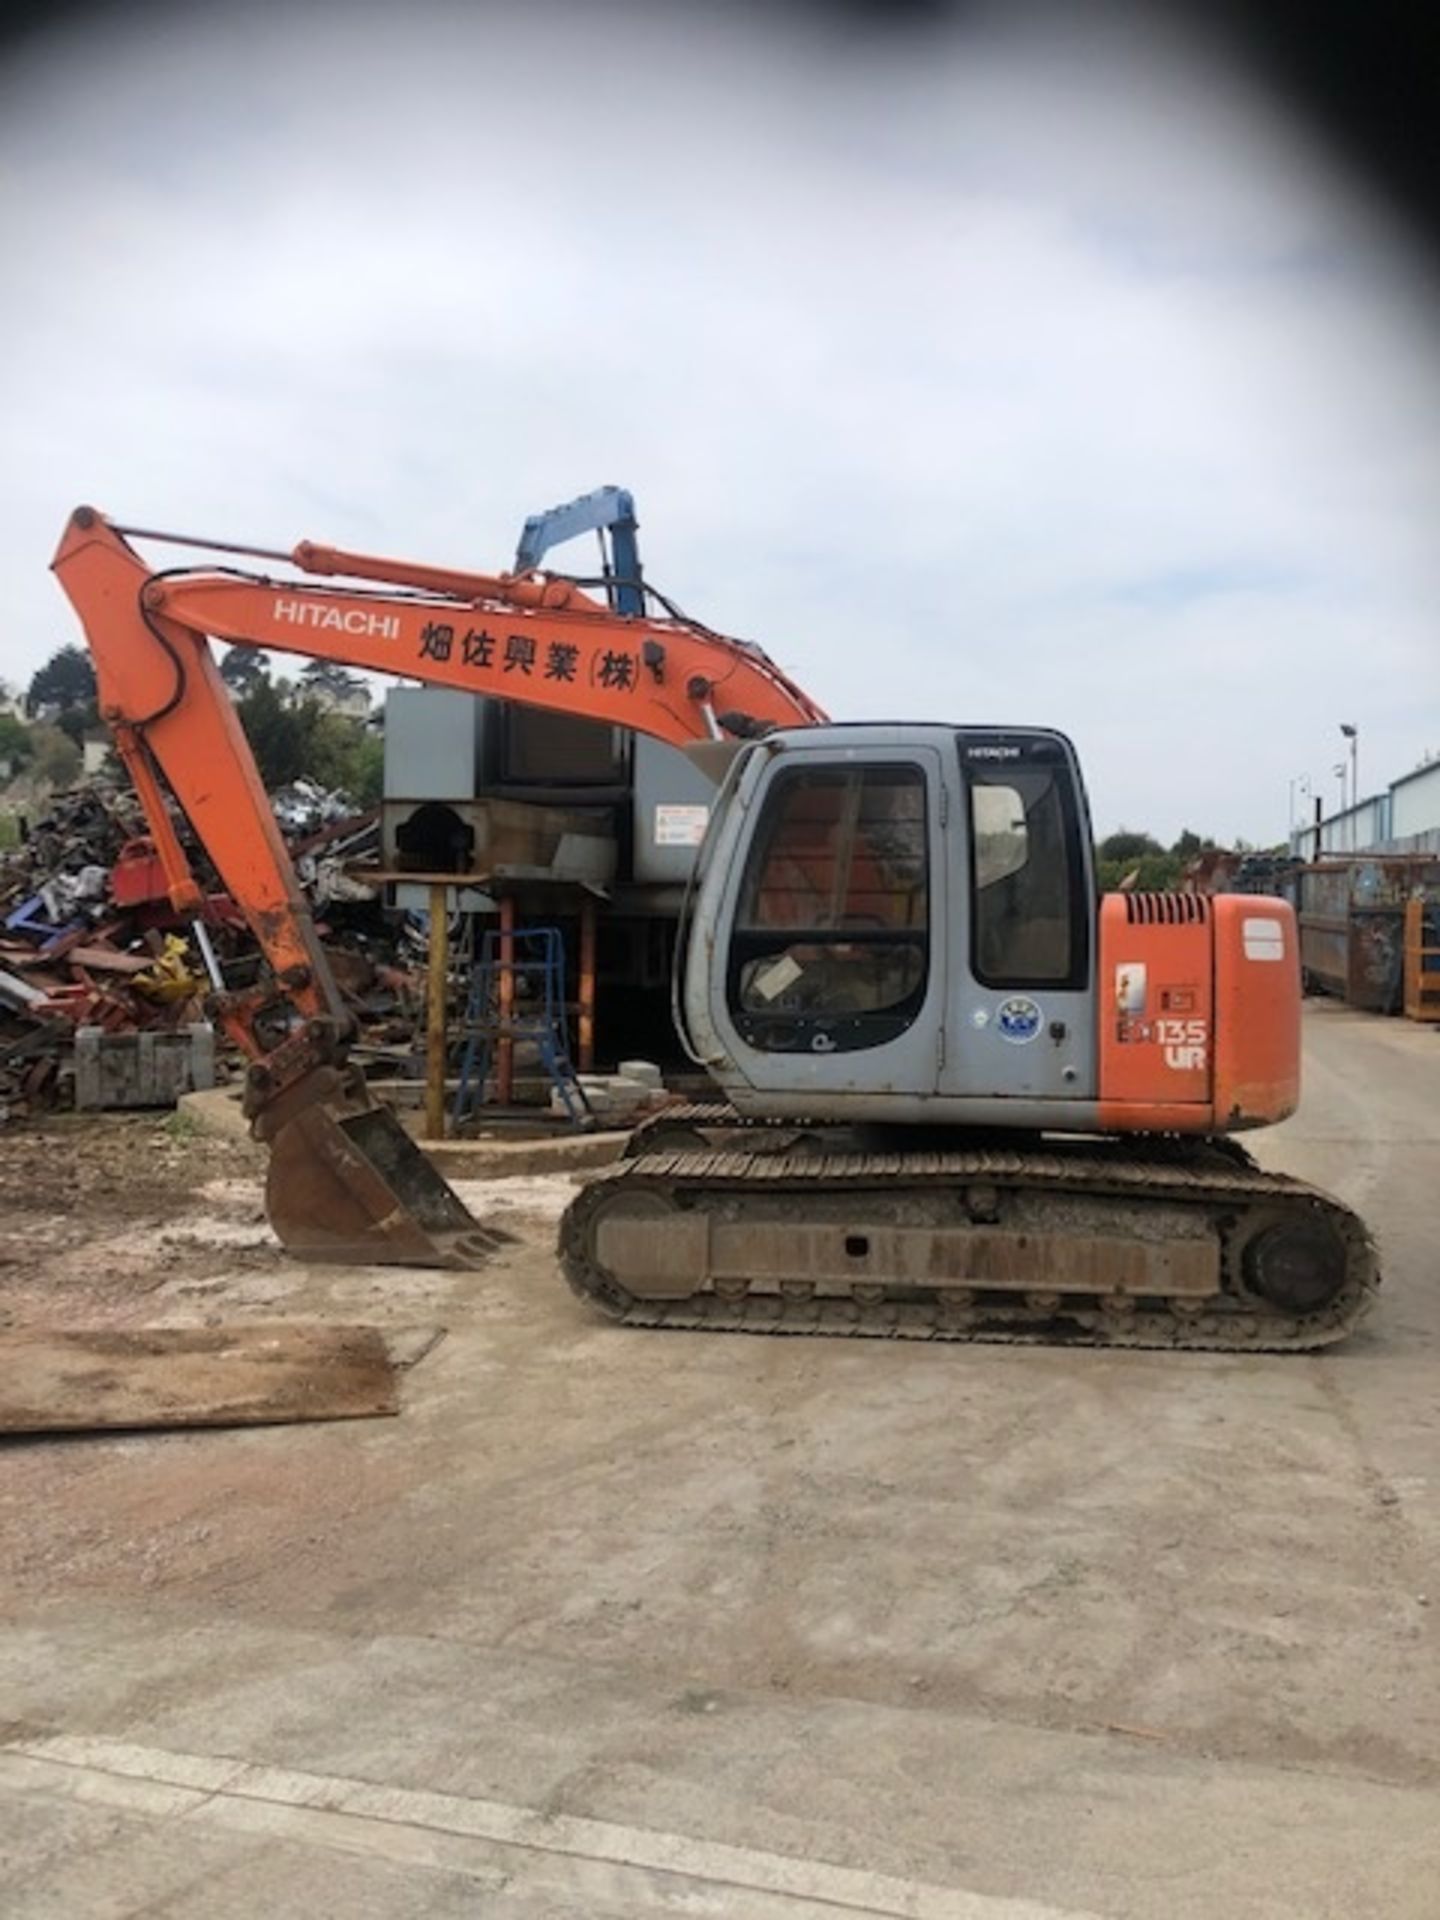 HITACHI EX135 13 TON TRACKED DIGGER / EXCAVATOR, RUNS WORKS AND DIGS, 1 BUCKET SUPPLIED *PLUS VAT* - Image 2 of 10